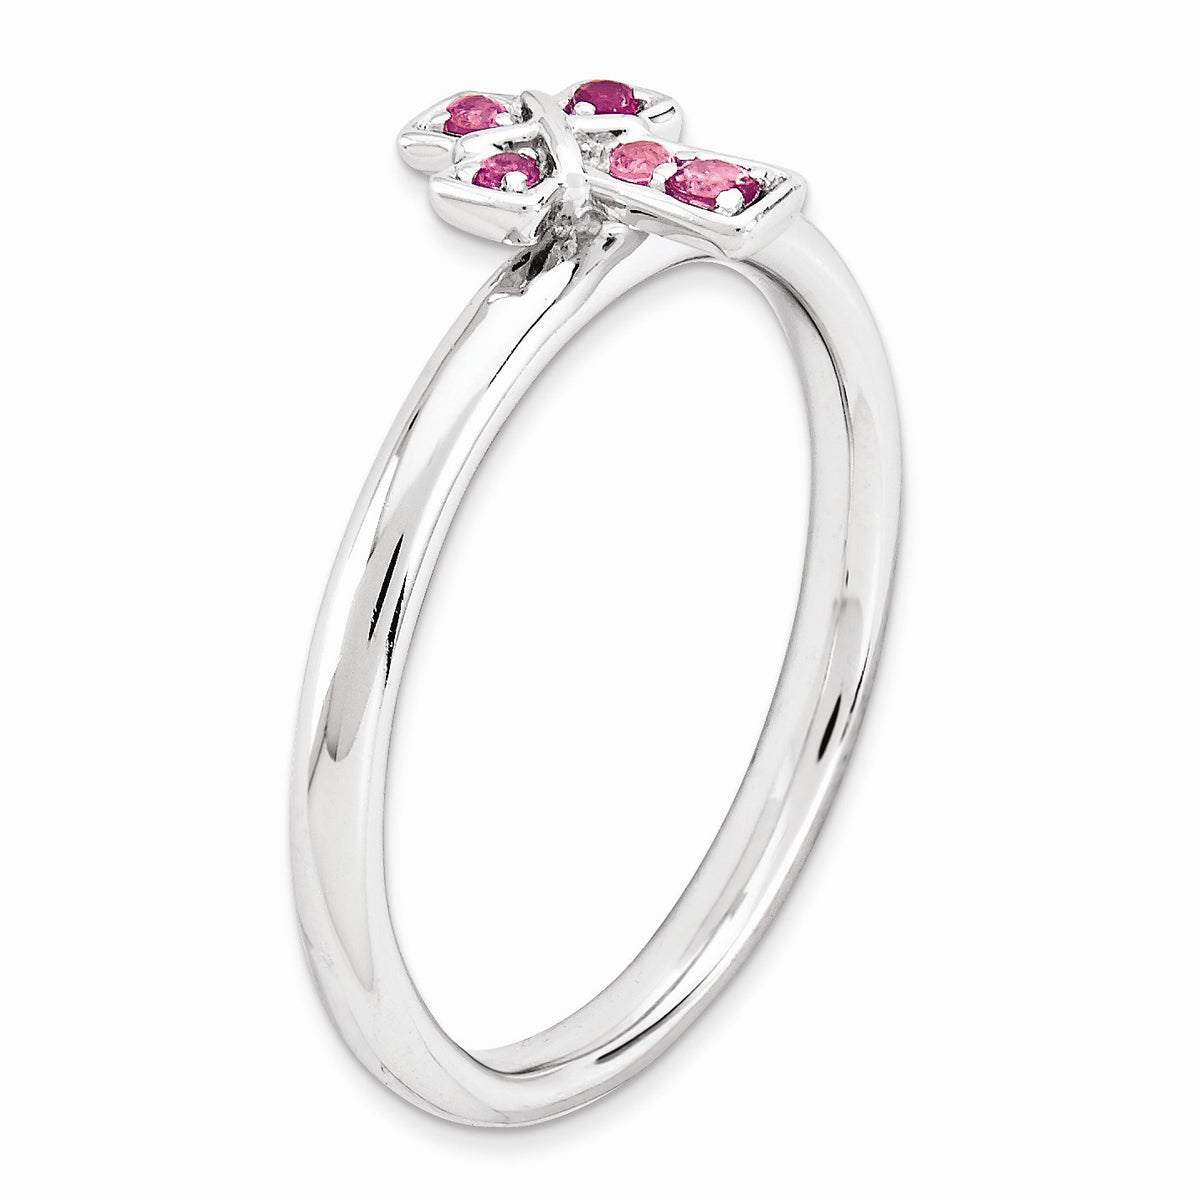 Alternate view of the Rhodium Sterling Silver Stackable Pink Tourmaline 9mm Cross Ring by The Black Bow Jewelry Co.